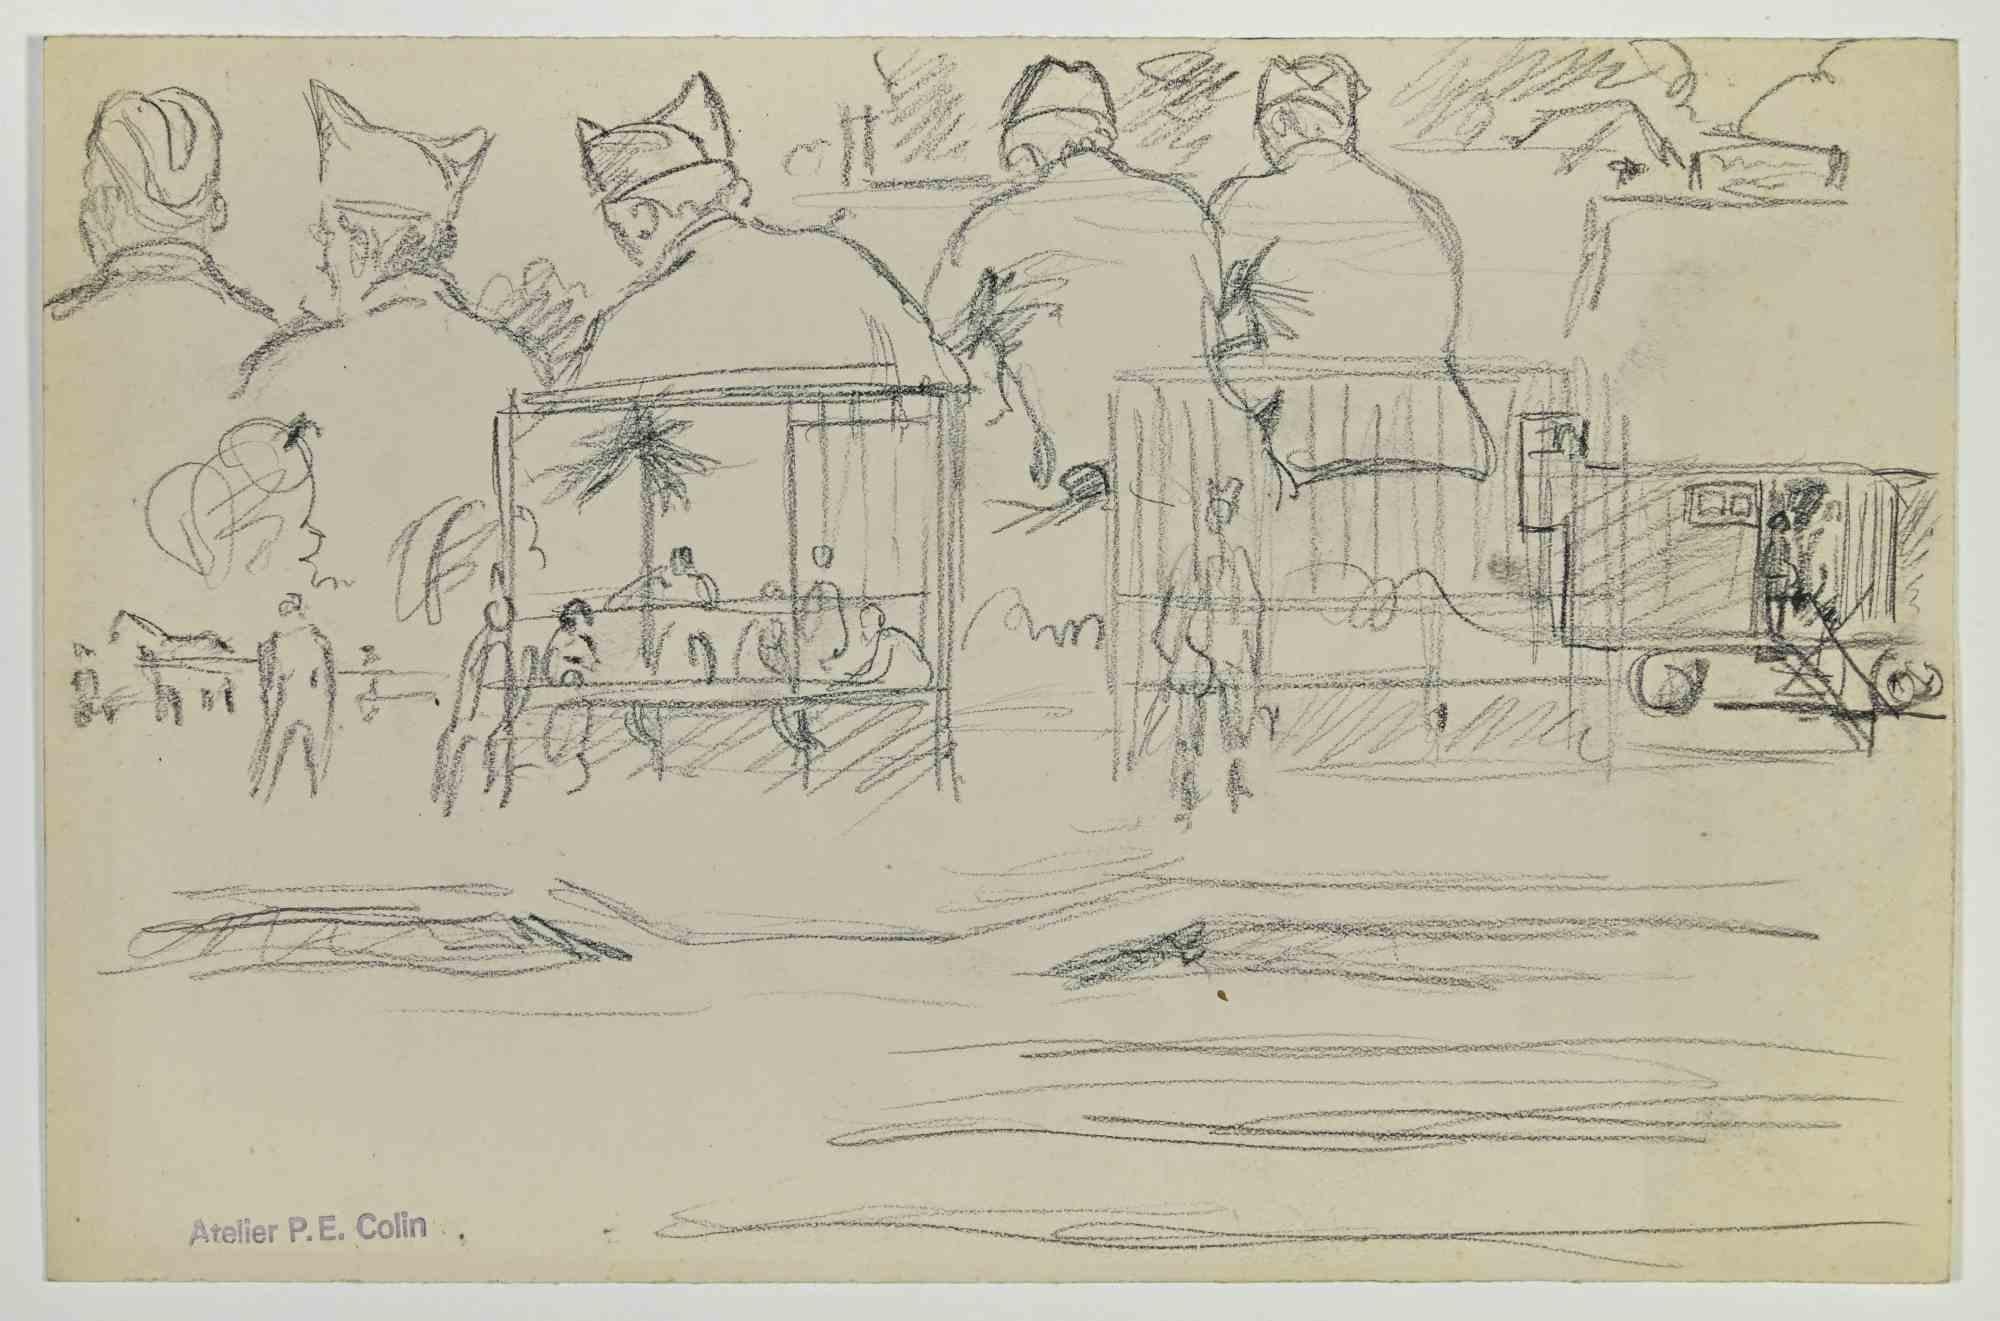 Soldiers Campsite is a drawing realized by Paul Emile Colin in the Early 20th Century.

Carbon Pencil on ivory-colored paper

Stamped on the lower.

Good conditions with slight foxing.

The artwork is realized through deft expressive strokes.